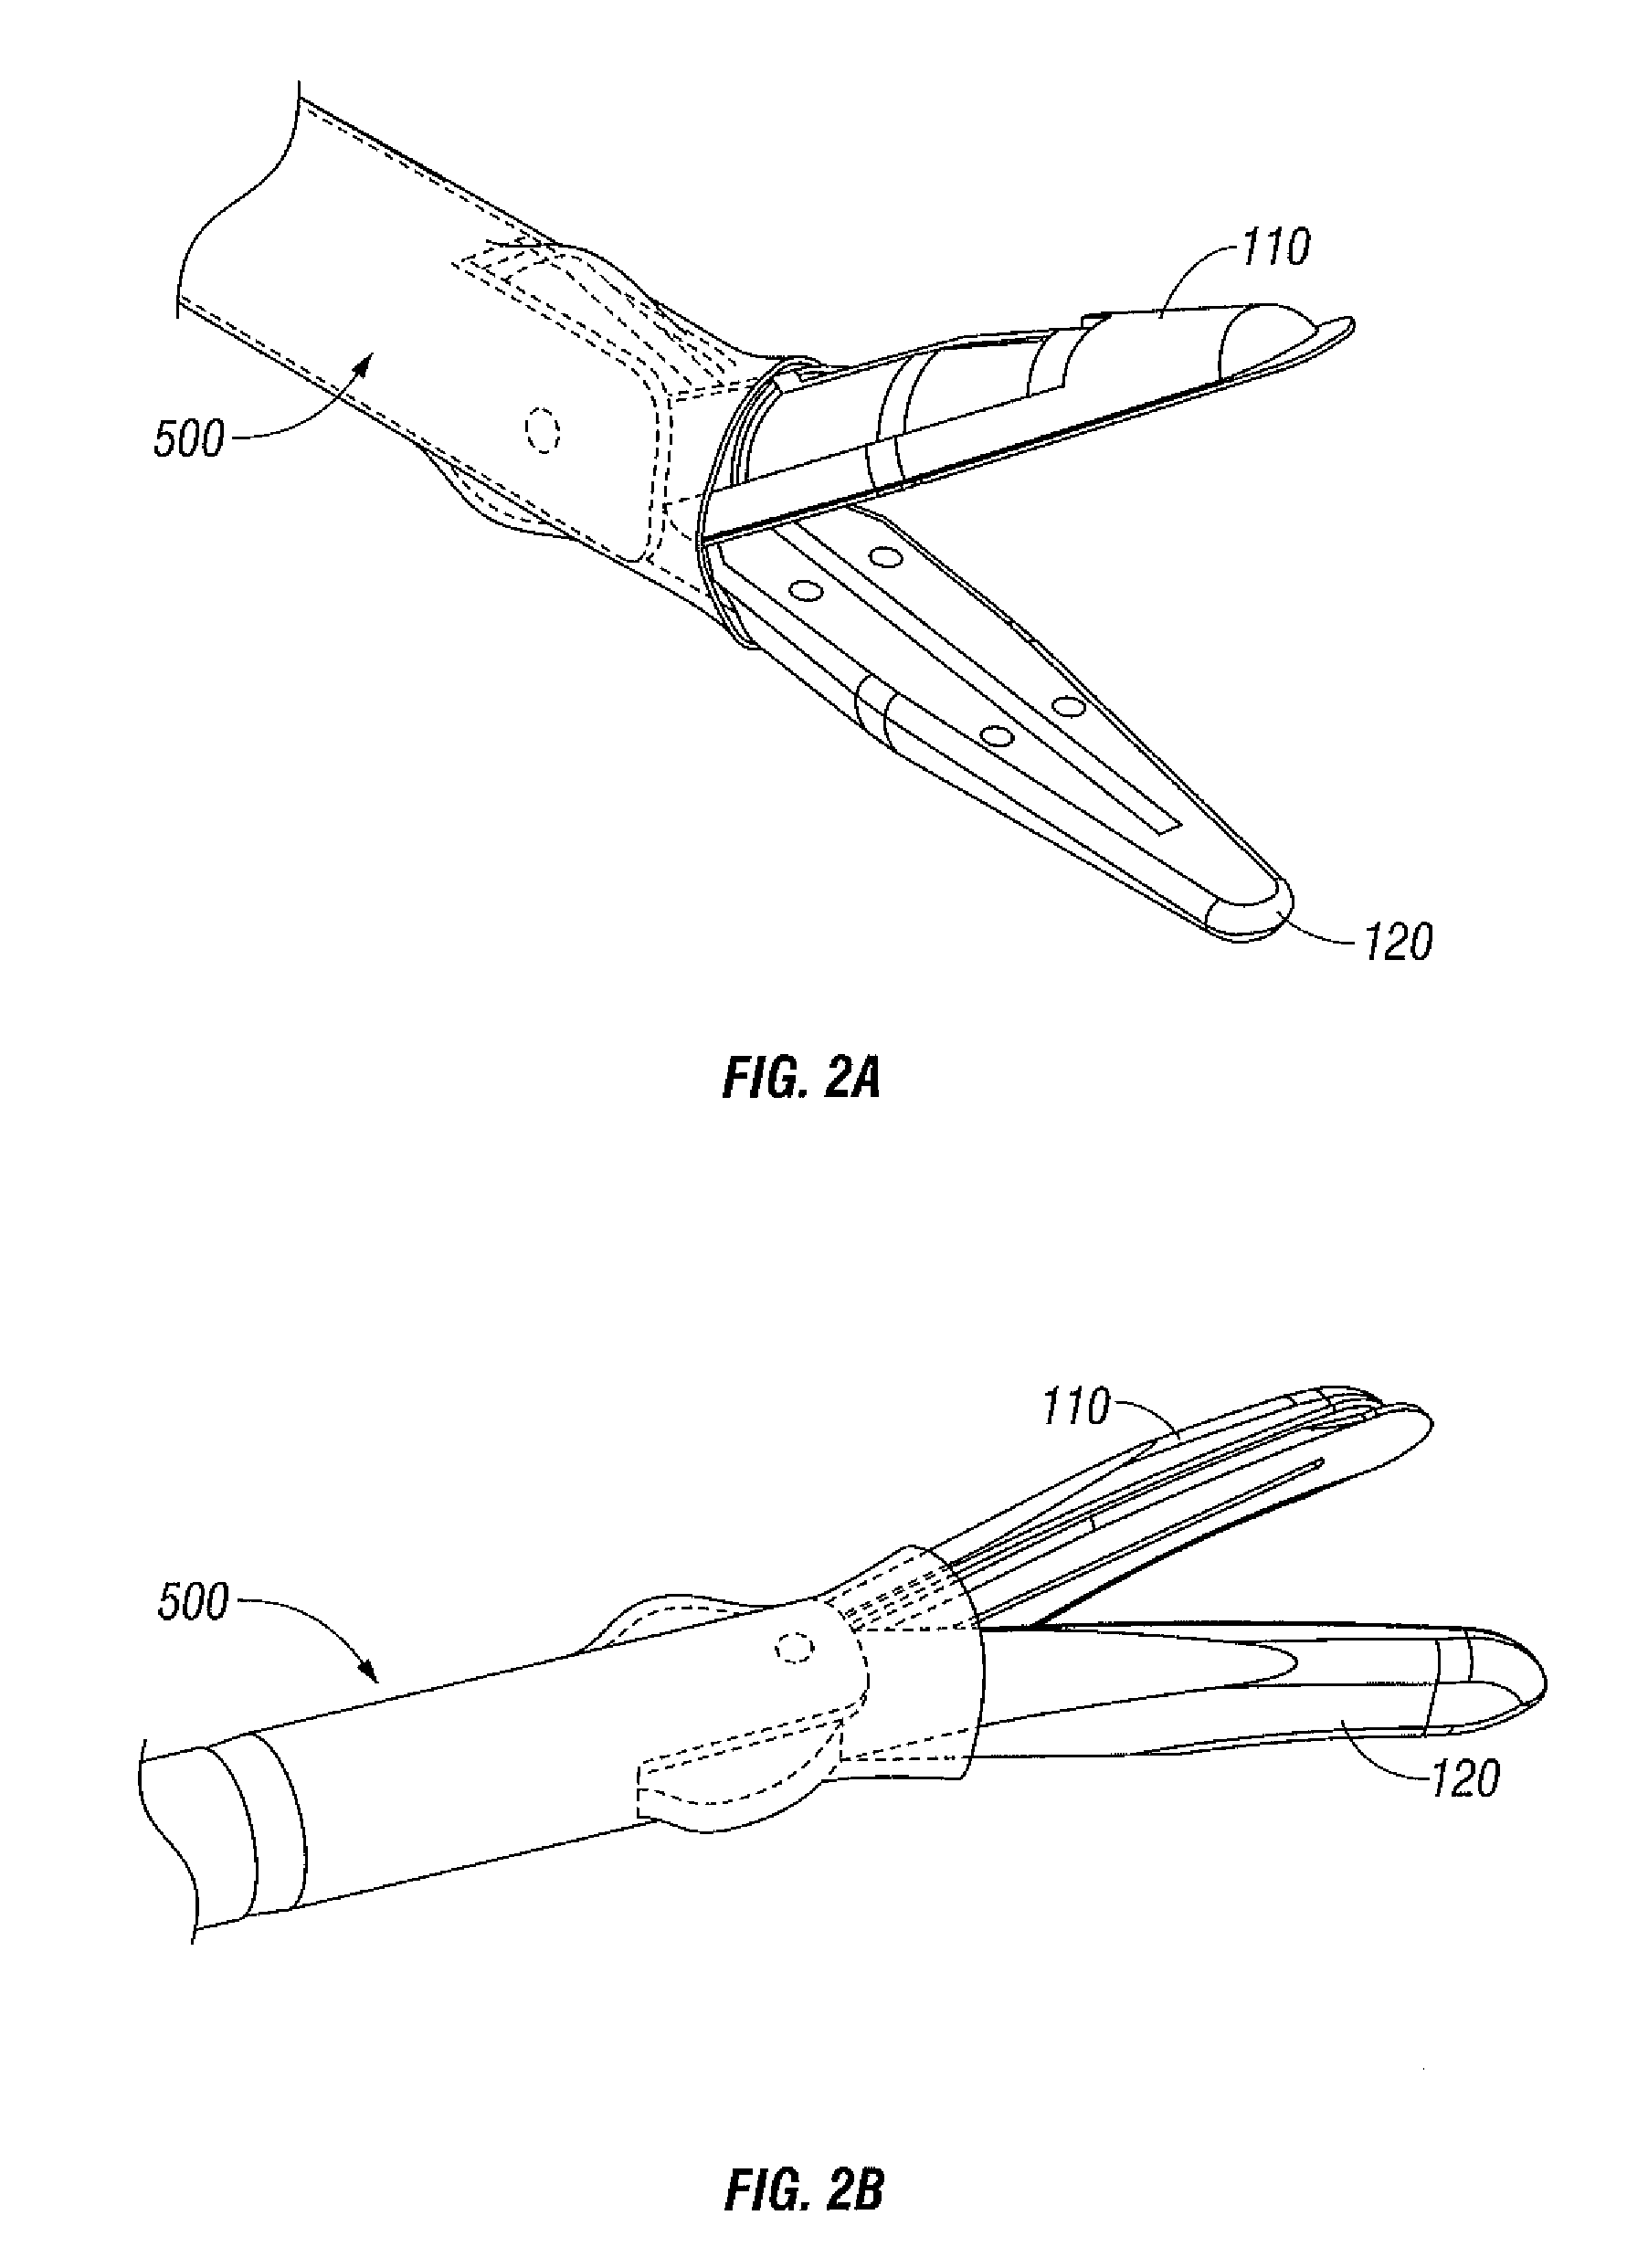 Insulating Mechanically-Interfaced Boot and Jaws for Electrosurgical Forceps